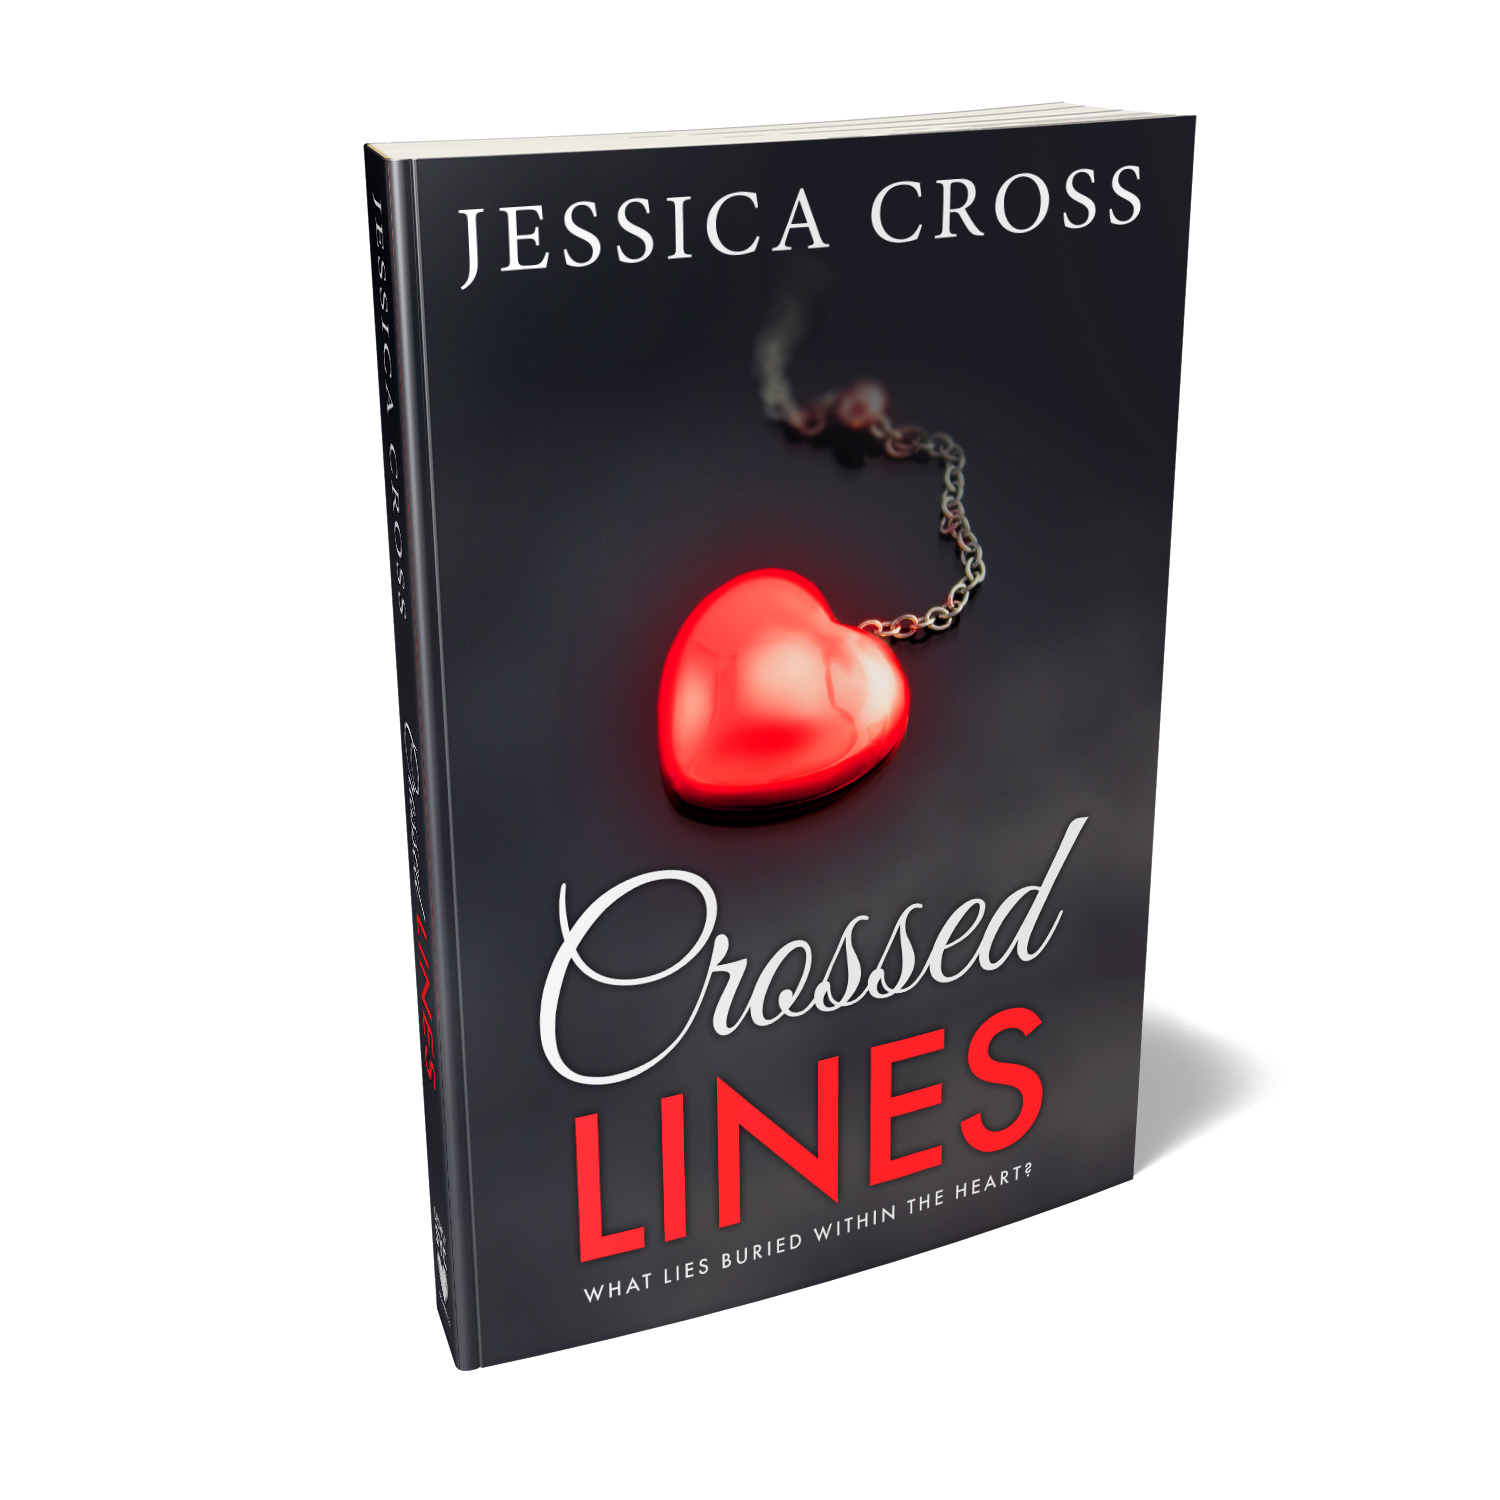 'Crossed Lines' is a dramatically sexy fiction, by Jessica Cross. The book cover and interior were designed by Mark Thomas, of coverness.com. To find out more about my book design services, please visit www.coverness.com.